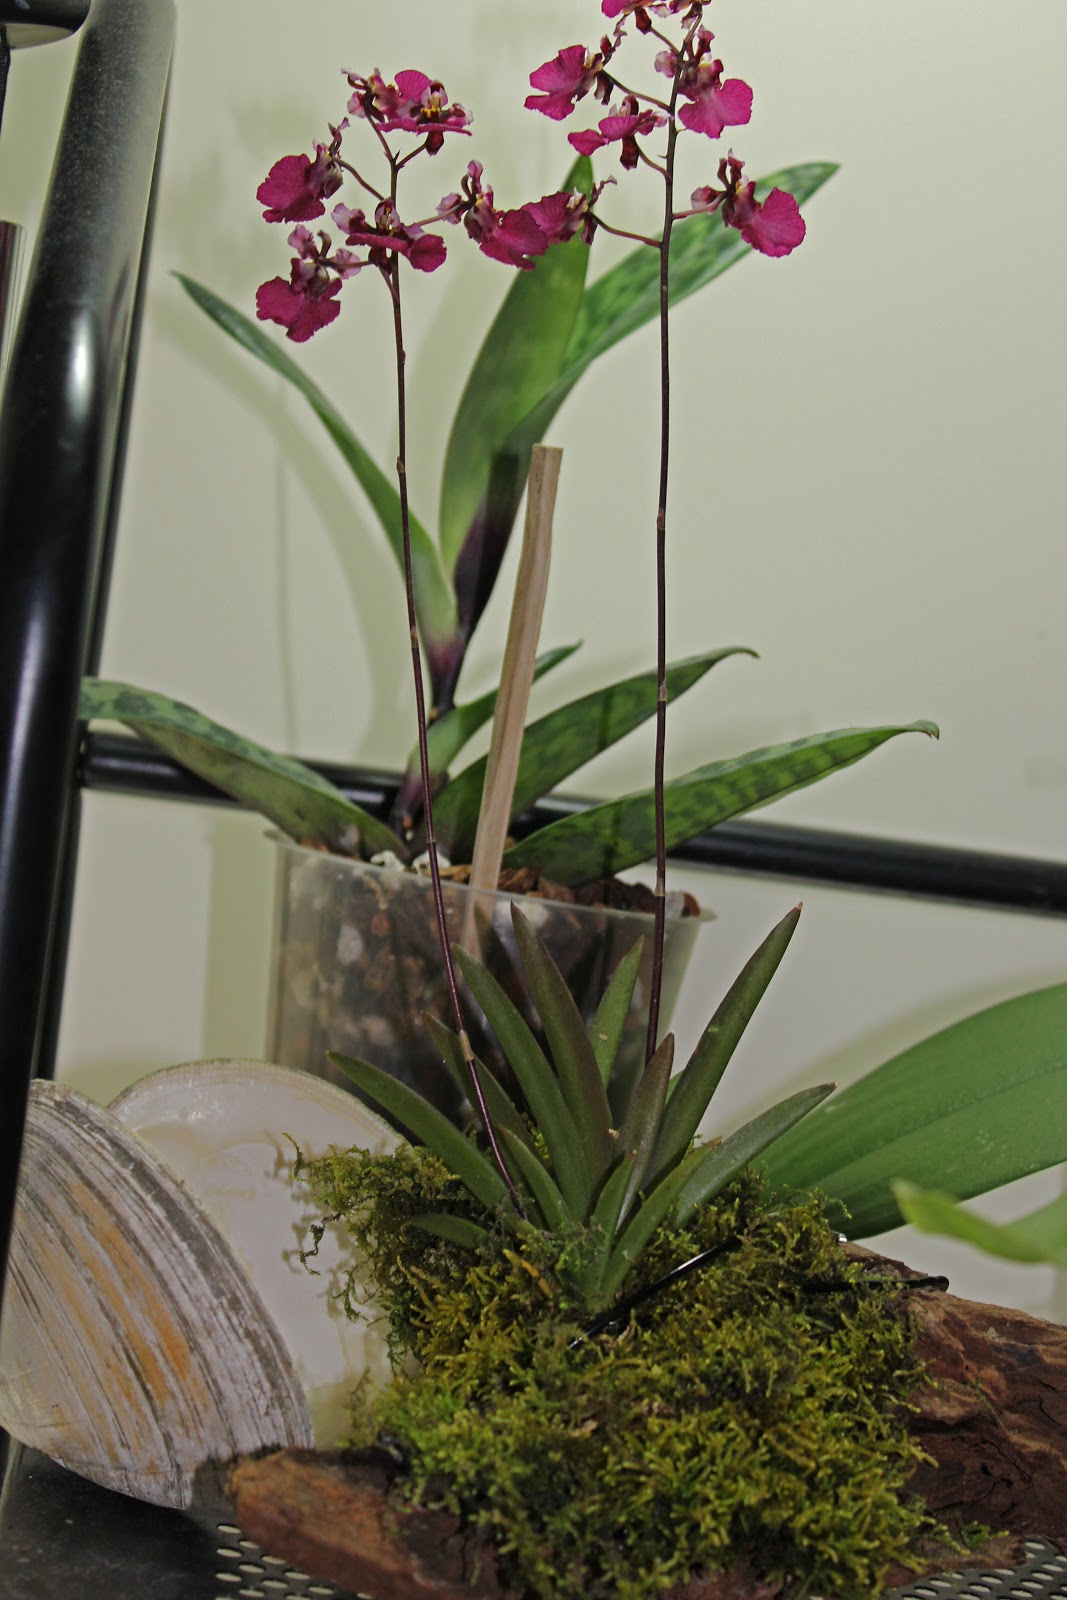 Maria's Orchids: Growing orchids in live moss